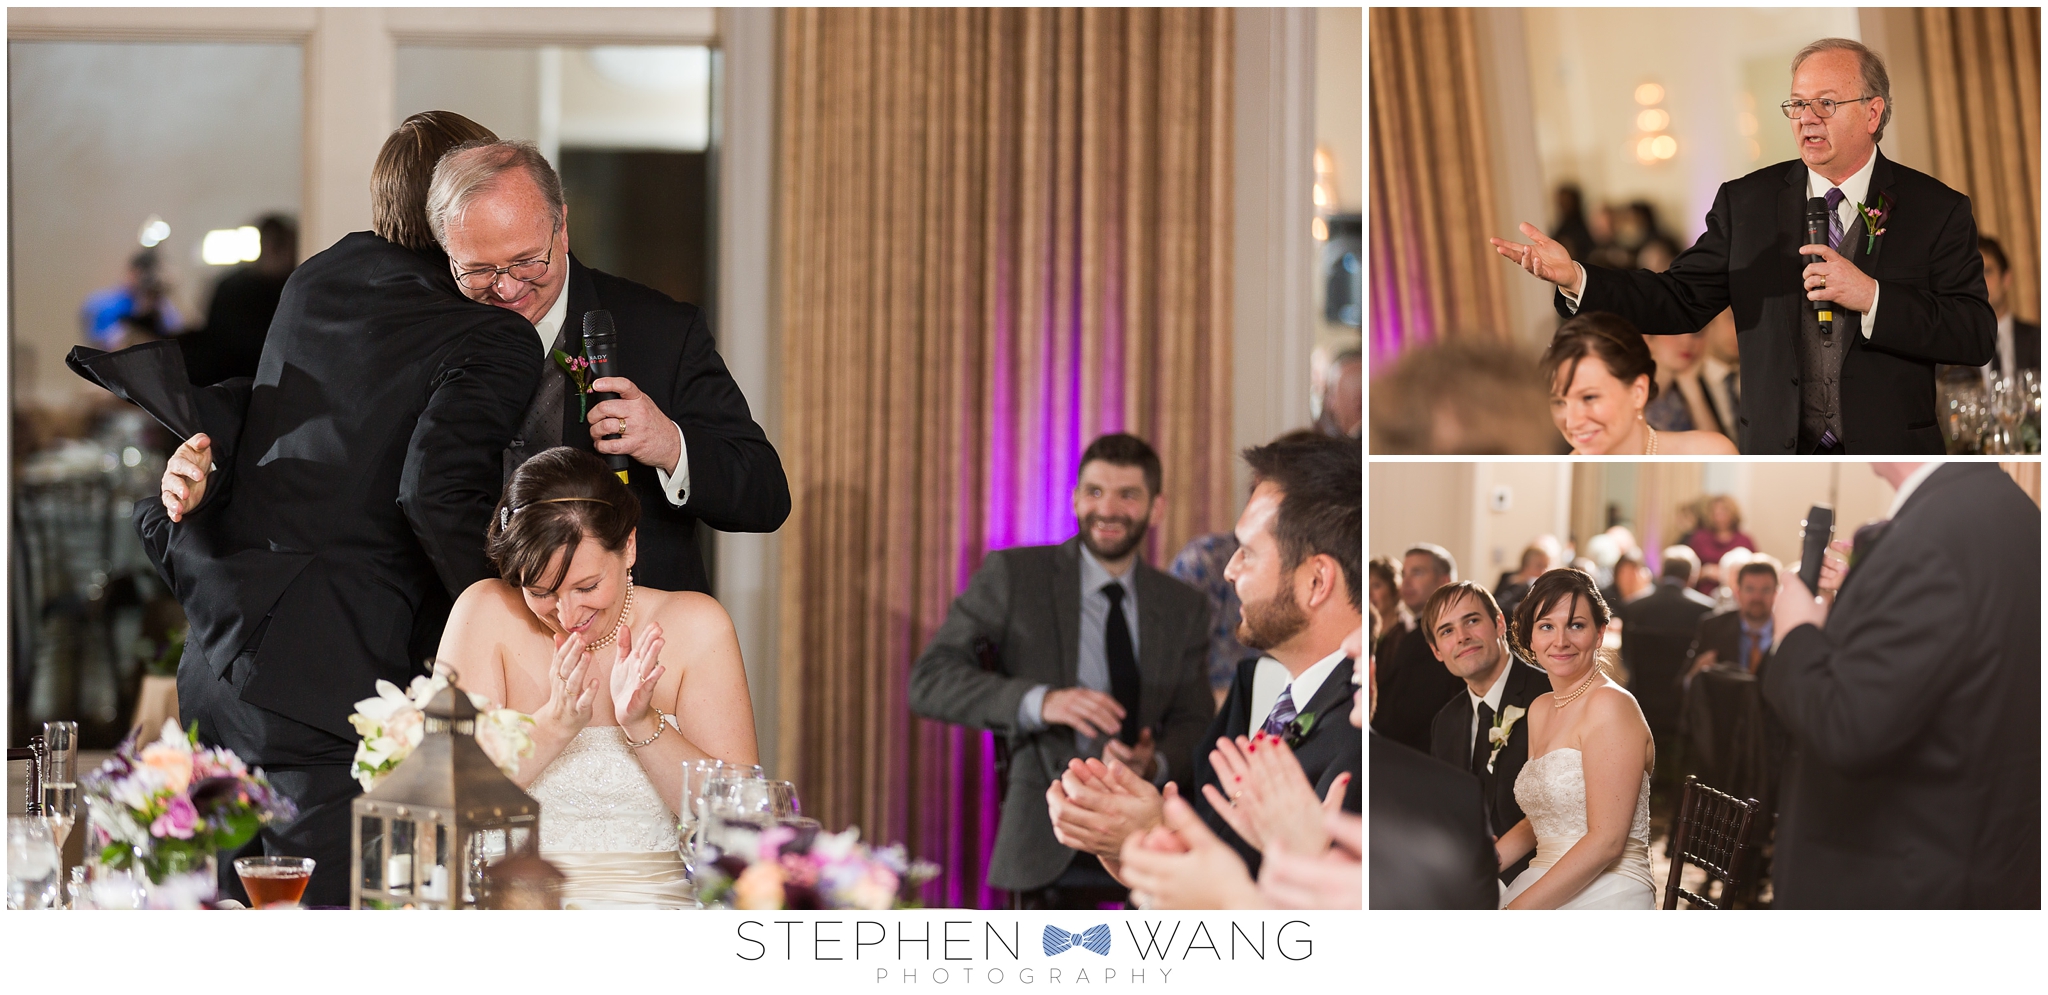 Stephen Wang Photography Wedding Connecticut CT Belle Terrace Avon Old Farms New England Wedding New Haven-11-17_0022.jpg